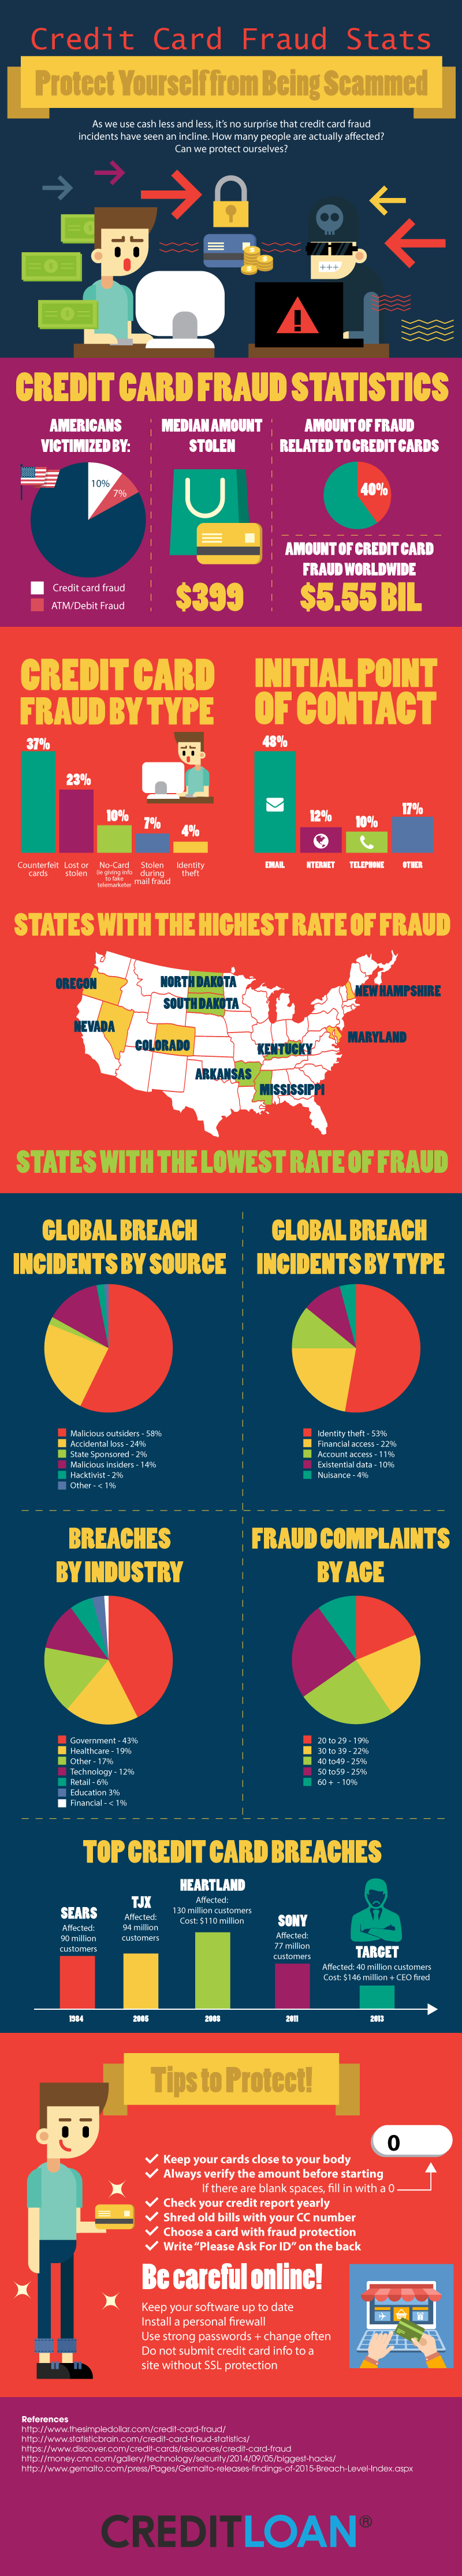 Credit Card Fraud Stats - Protect Yourself from Being Scammed